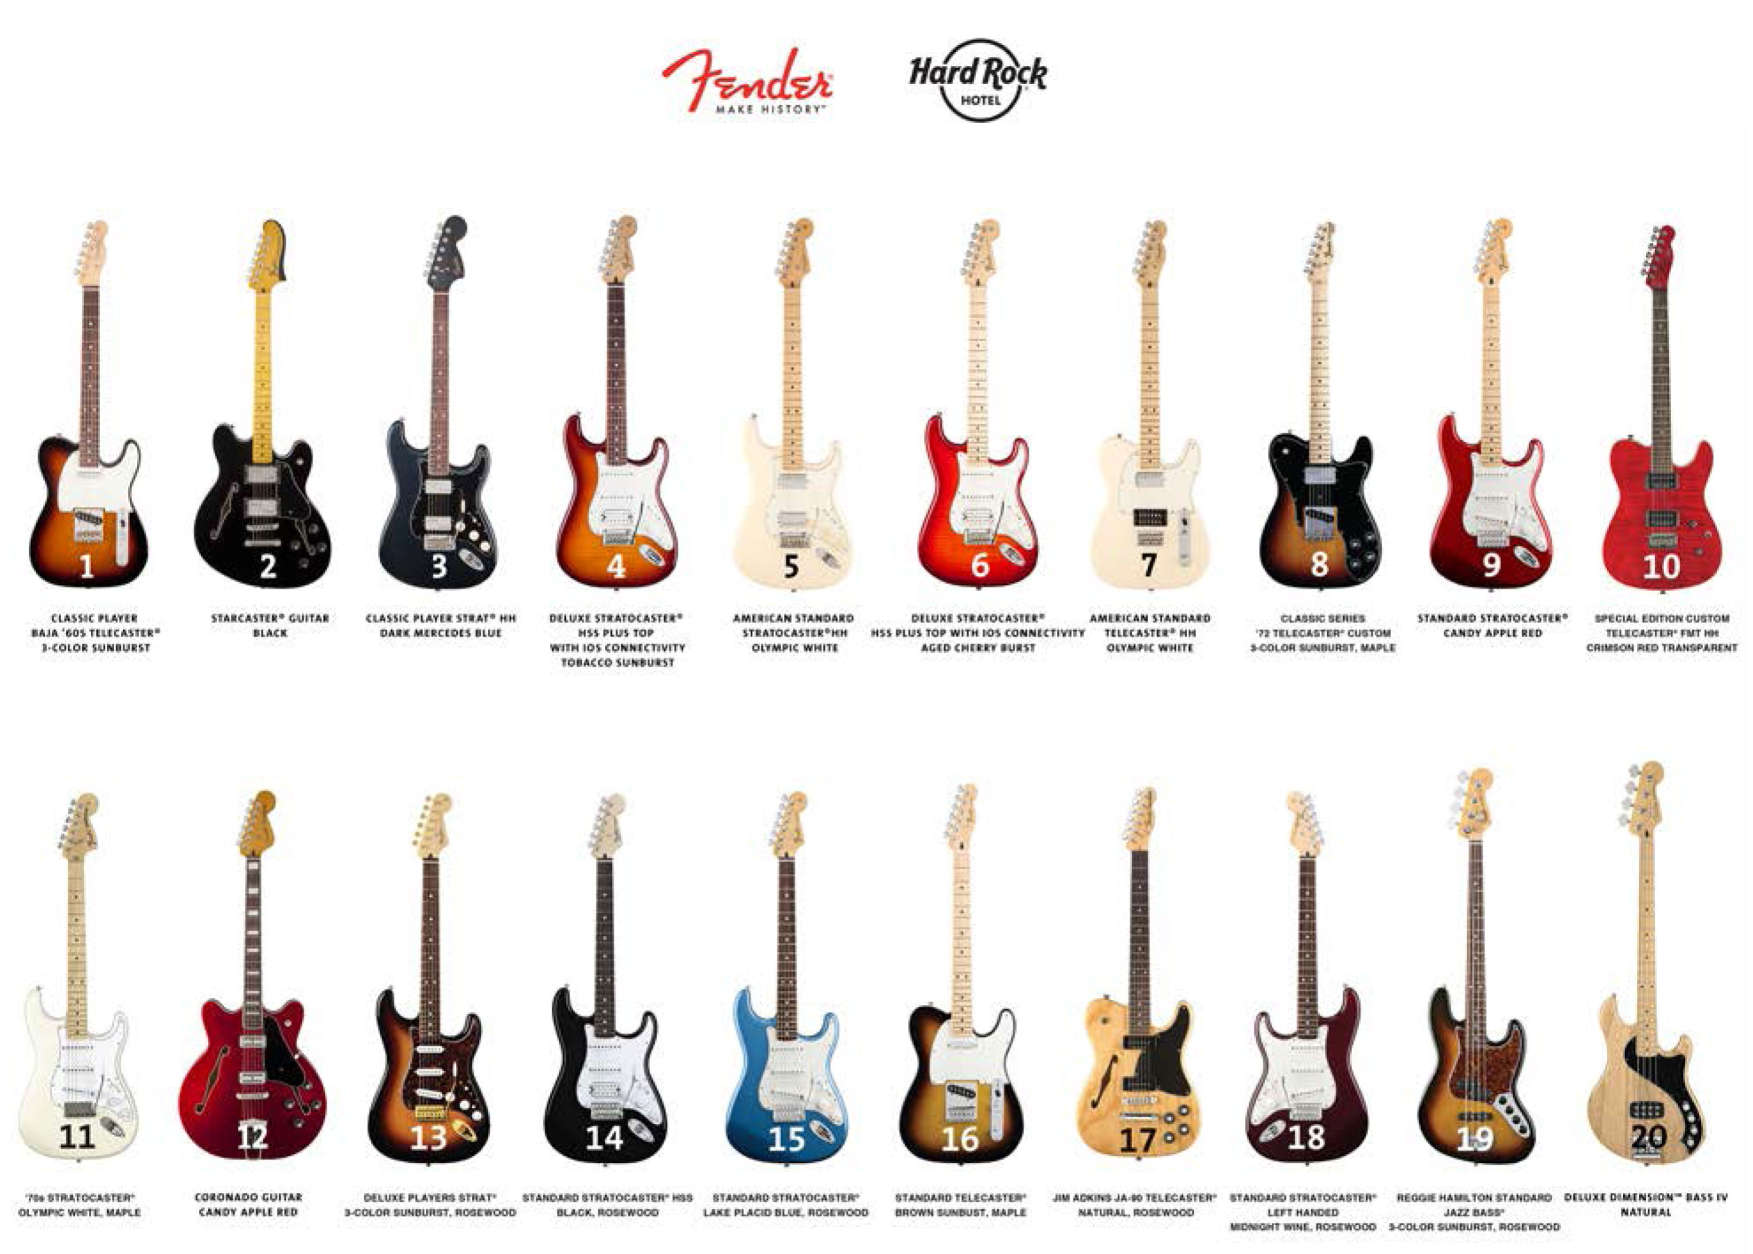 Take your pick of Fender guitars at The Hard Rock Hotel Chicago. (Courtesy The Hard Rock Hotel Chicago)